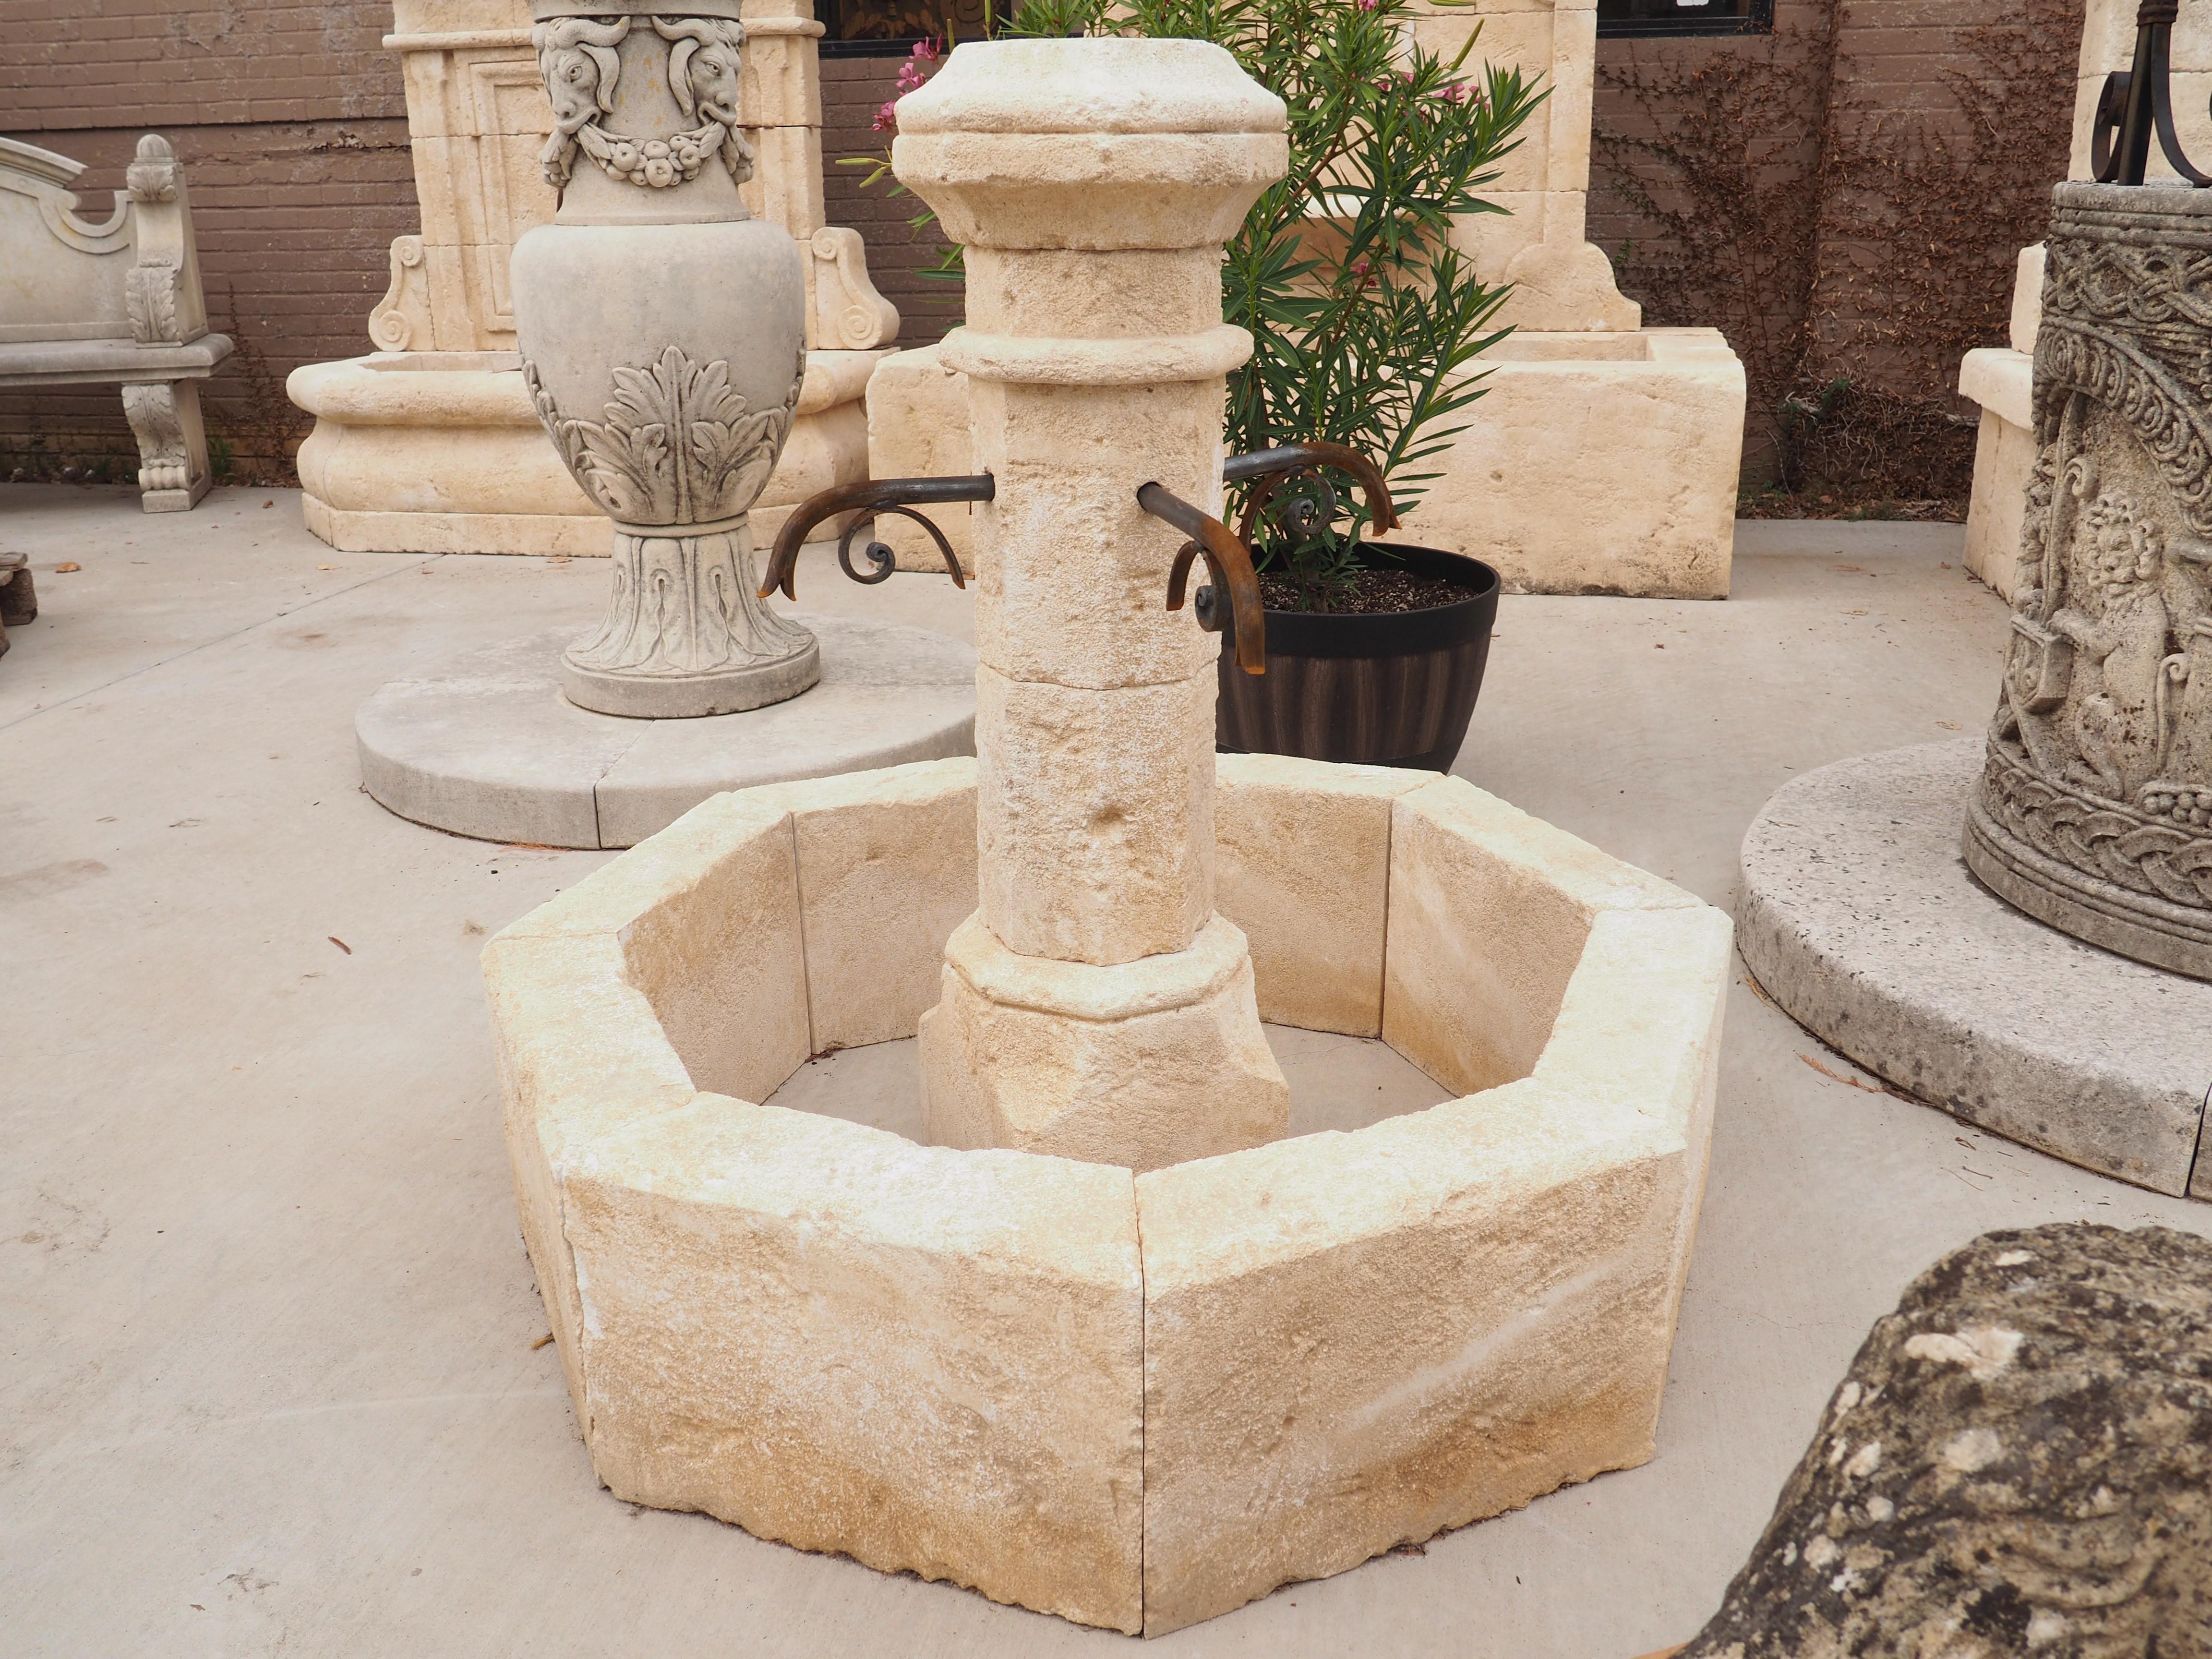 This wonderfully hand carved limestone, small centre fountain from France is octagonal in shape. It has four iron spouts that adorn the centre post. Always used as center fountains in villages throughout the ages in France, they are a beautiful